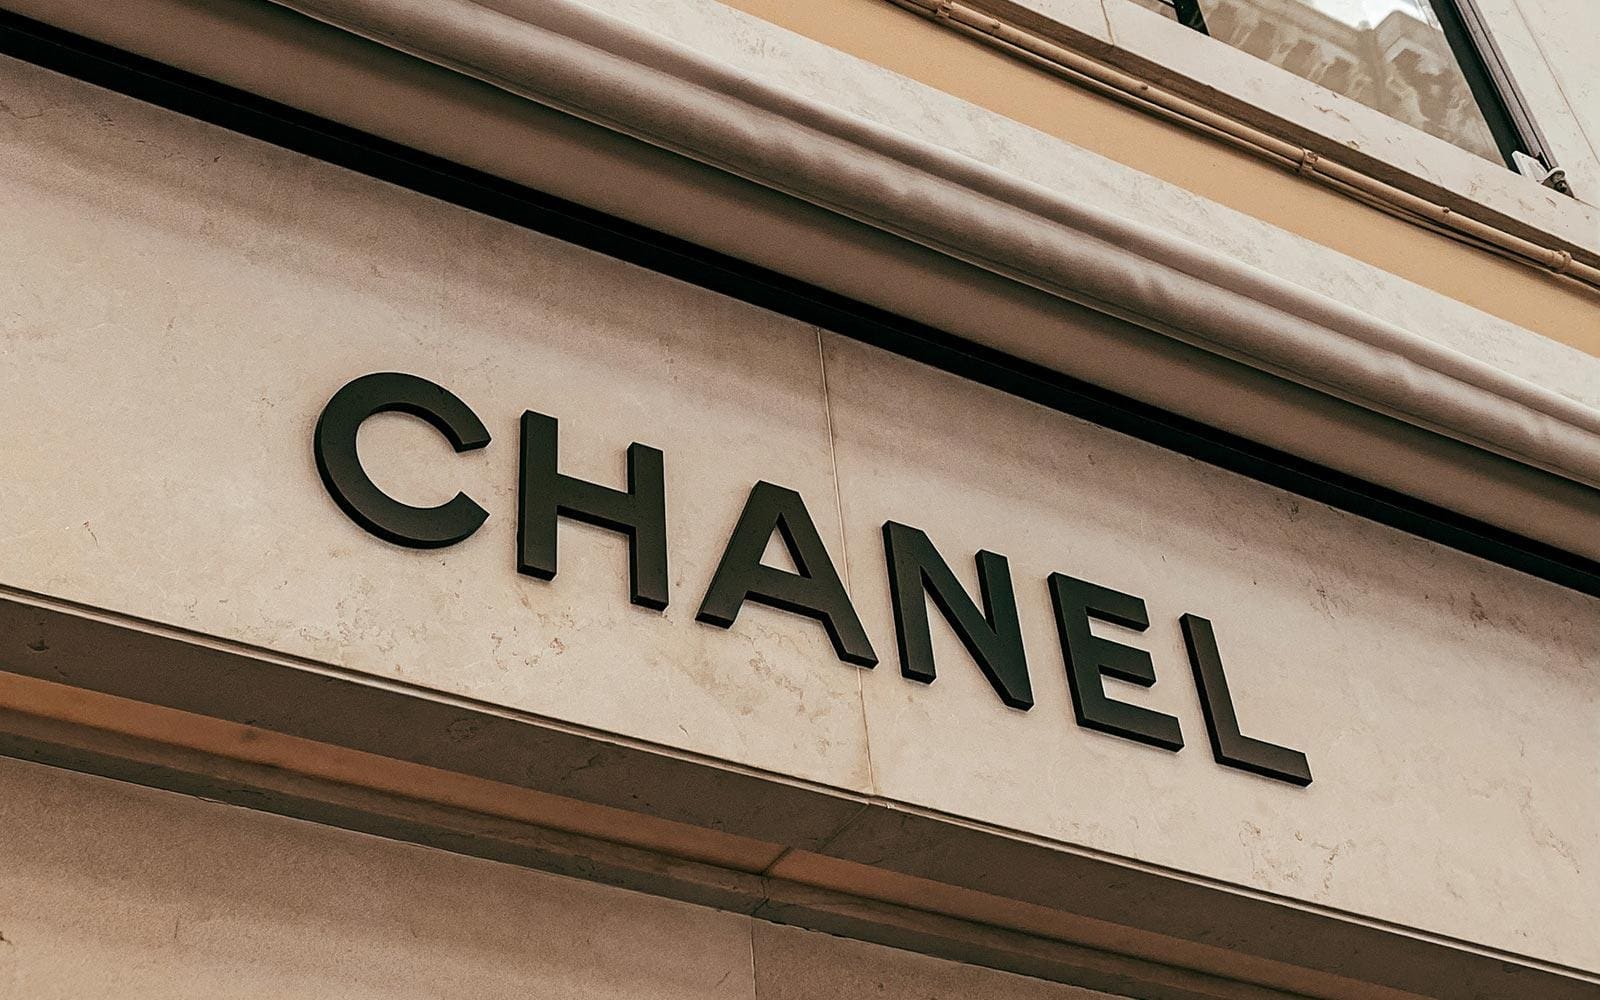 Luxury brands increase their prices once again